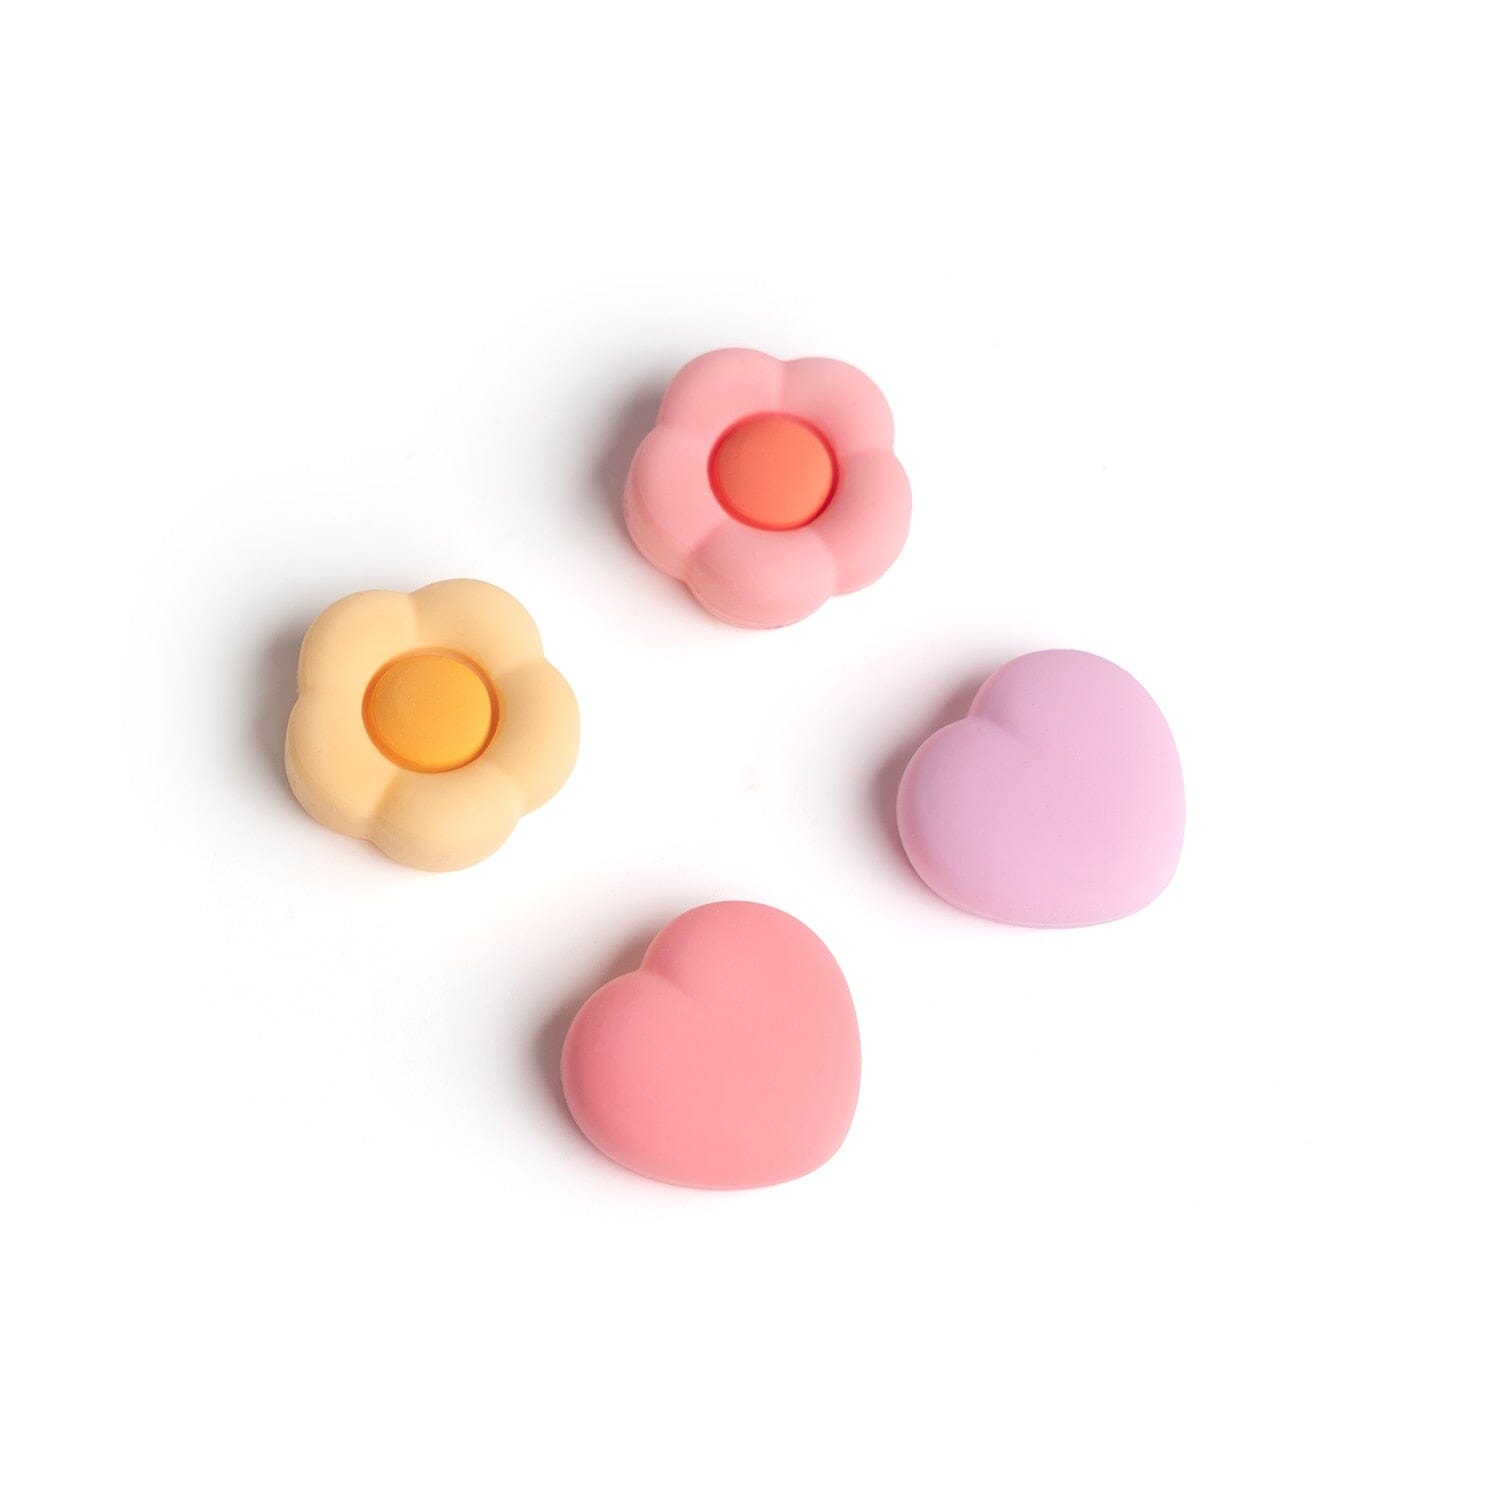 4pcs Pastel Pink Joy Con Thumb Grips Joystick Caps Soft Silicone Covers Button For Nintendo Switch Oled Switch Lite Controller 0 GatoGeek 